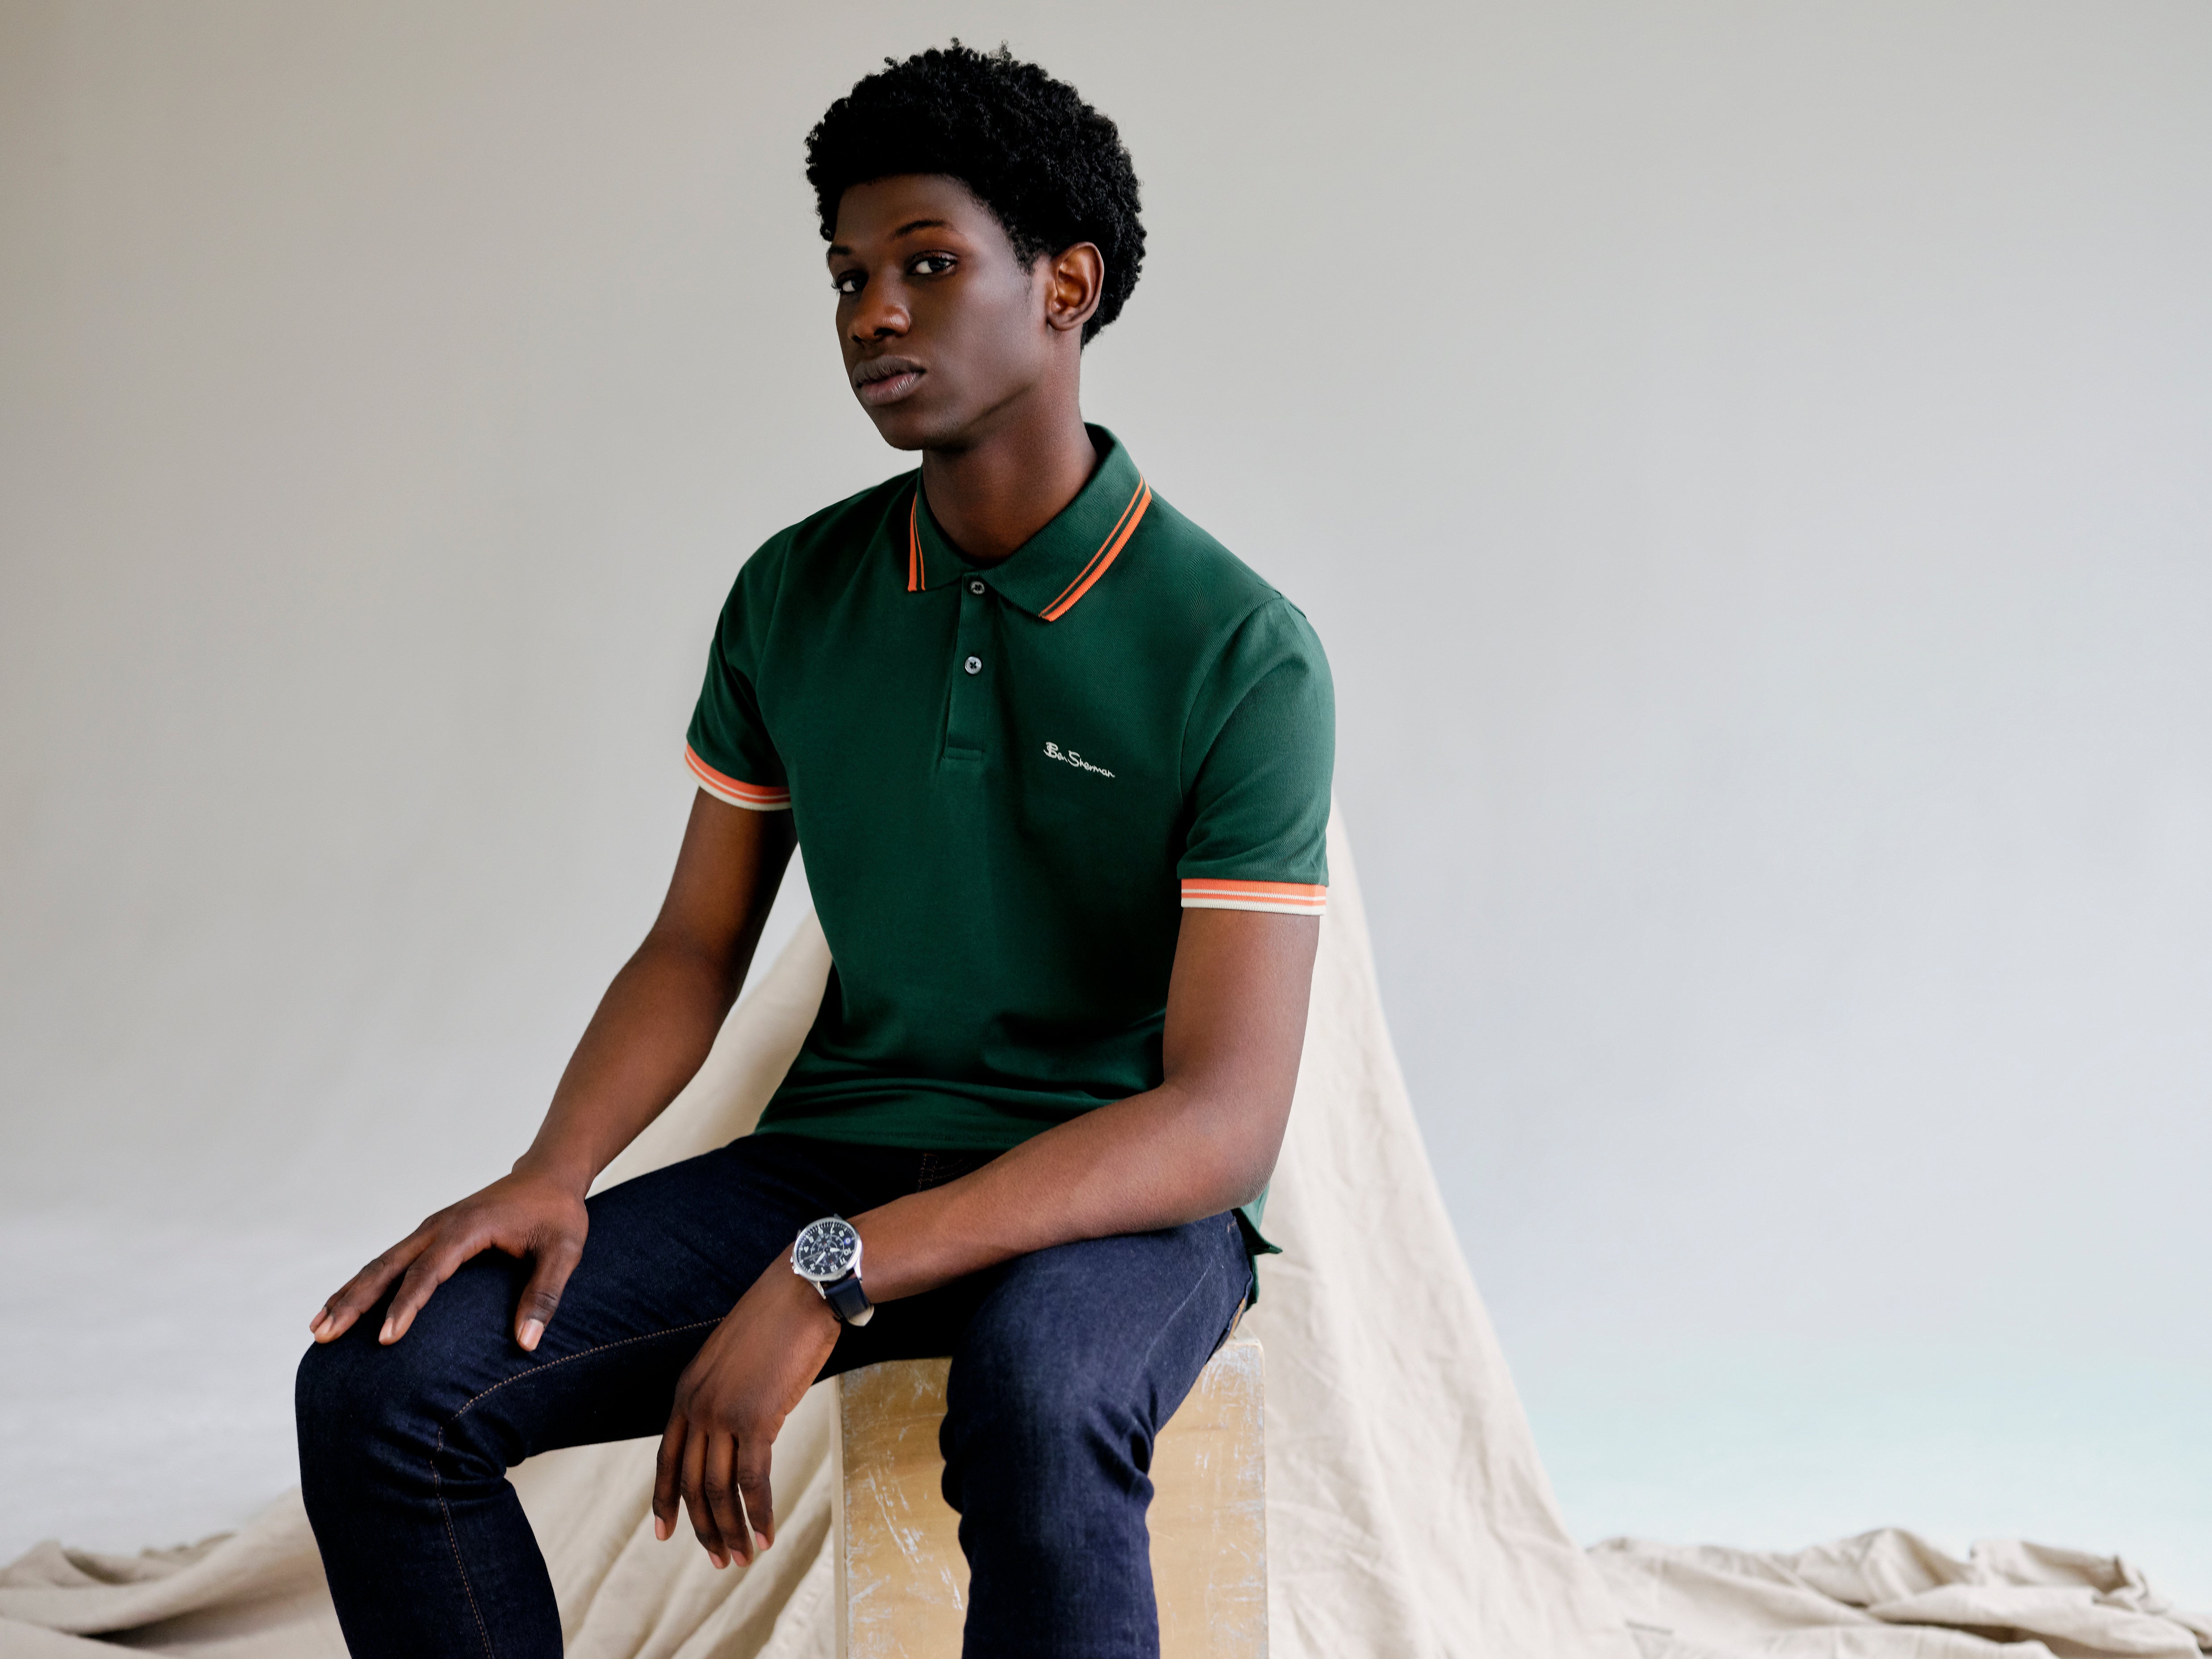 Madani wears one of our classic polos